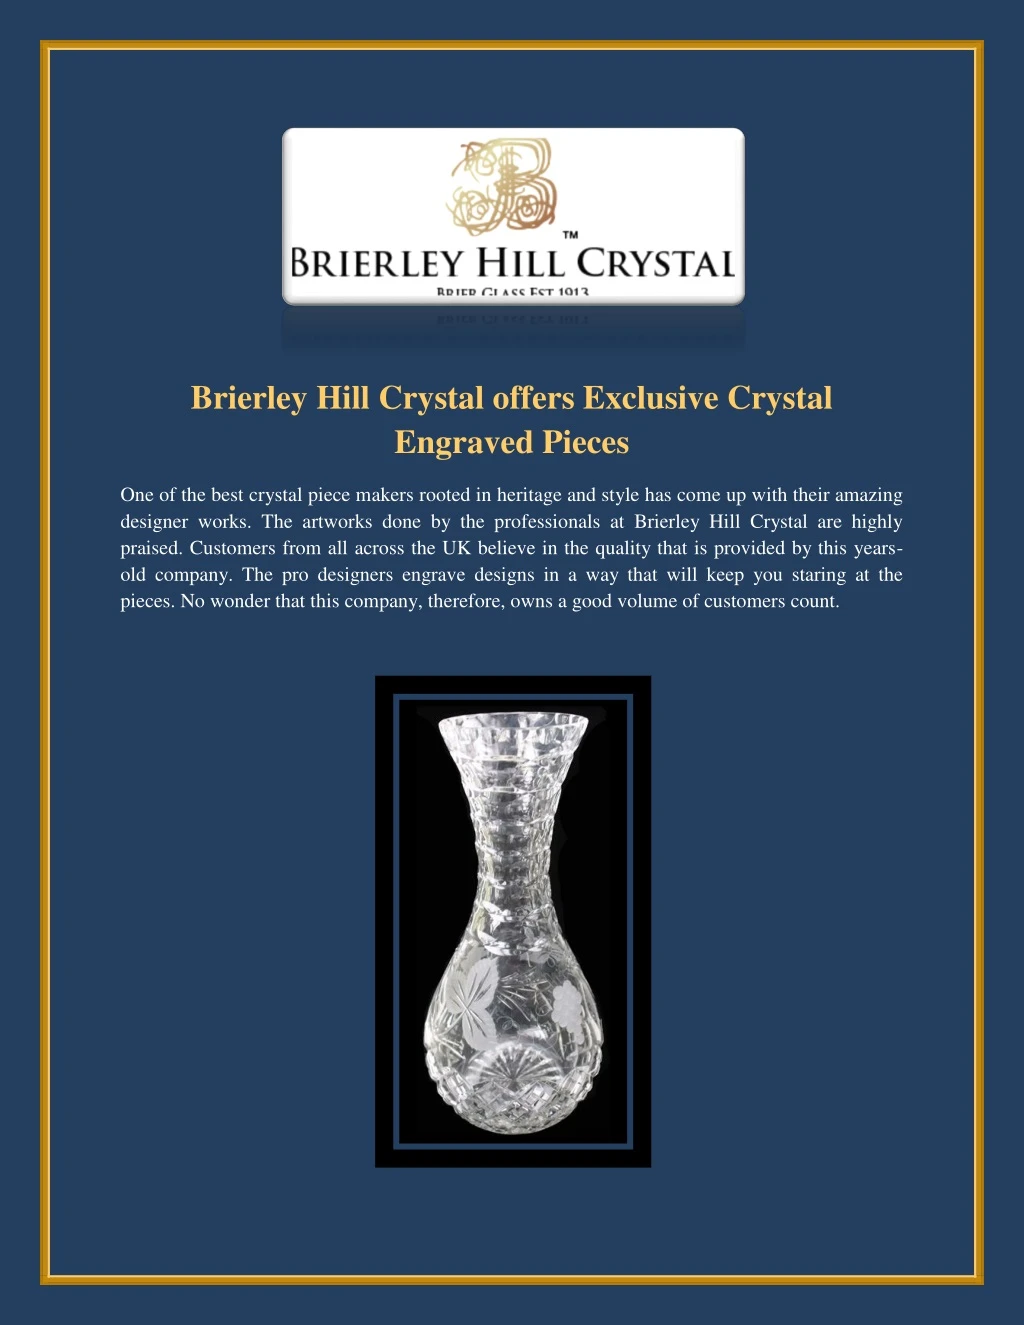 brierley hill crystal offers exclusive crystal